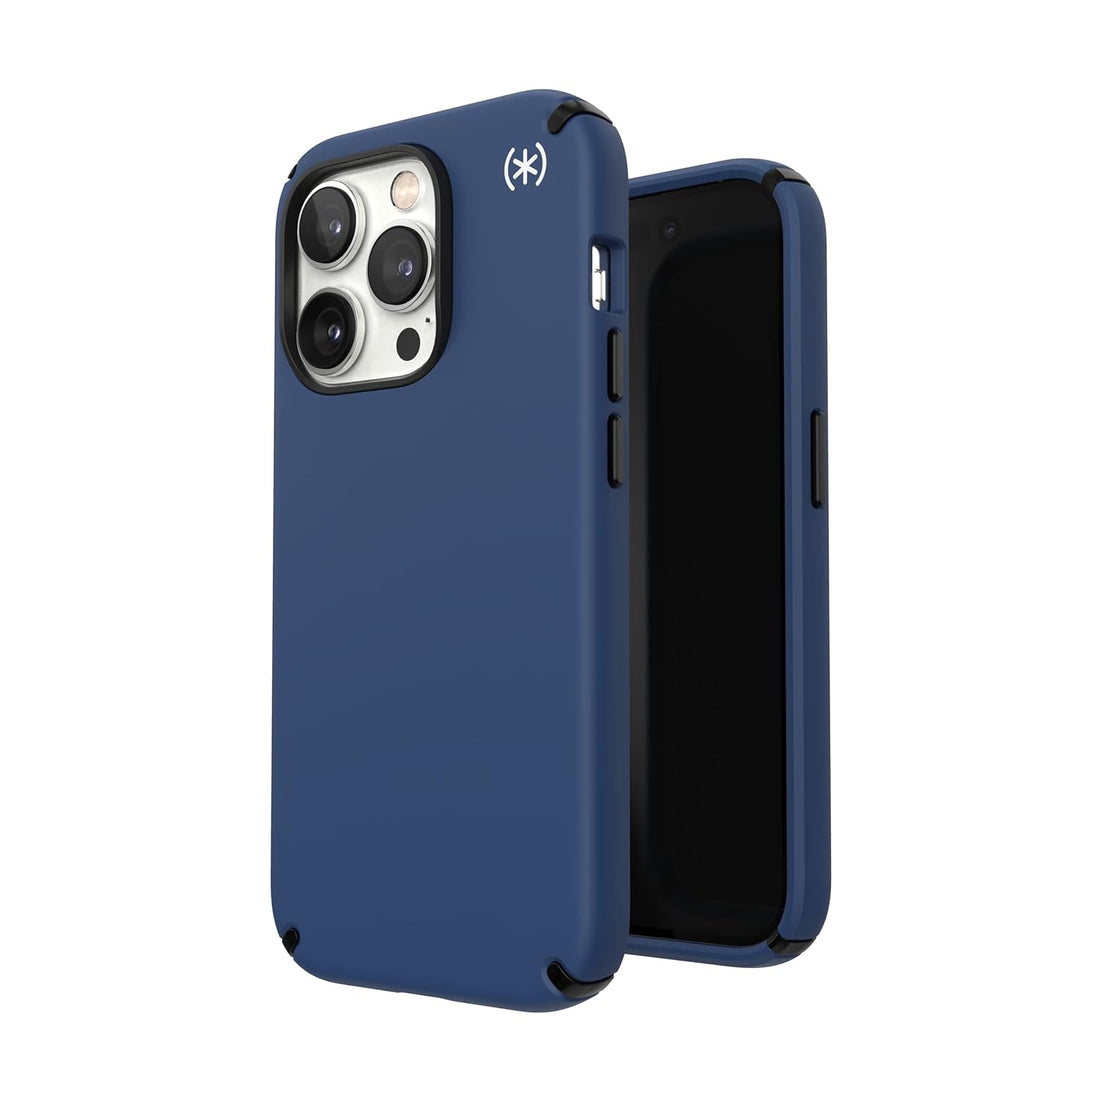 Speck iPhone 14 Pro Case - Drop Protection, Scratch Resistant, Built for MagSafe Slim Phone Case for 6.1 Inch iPhones 14 Pro - Anti-Fade Case - Presidio2 - Coastal Blue/Black/White